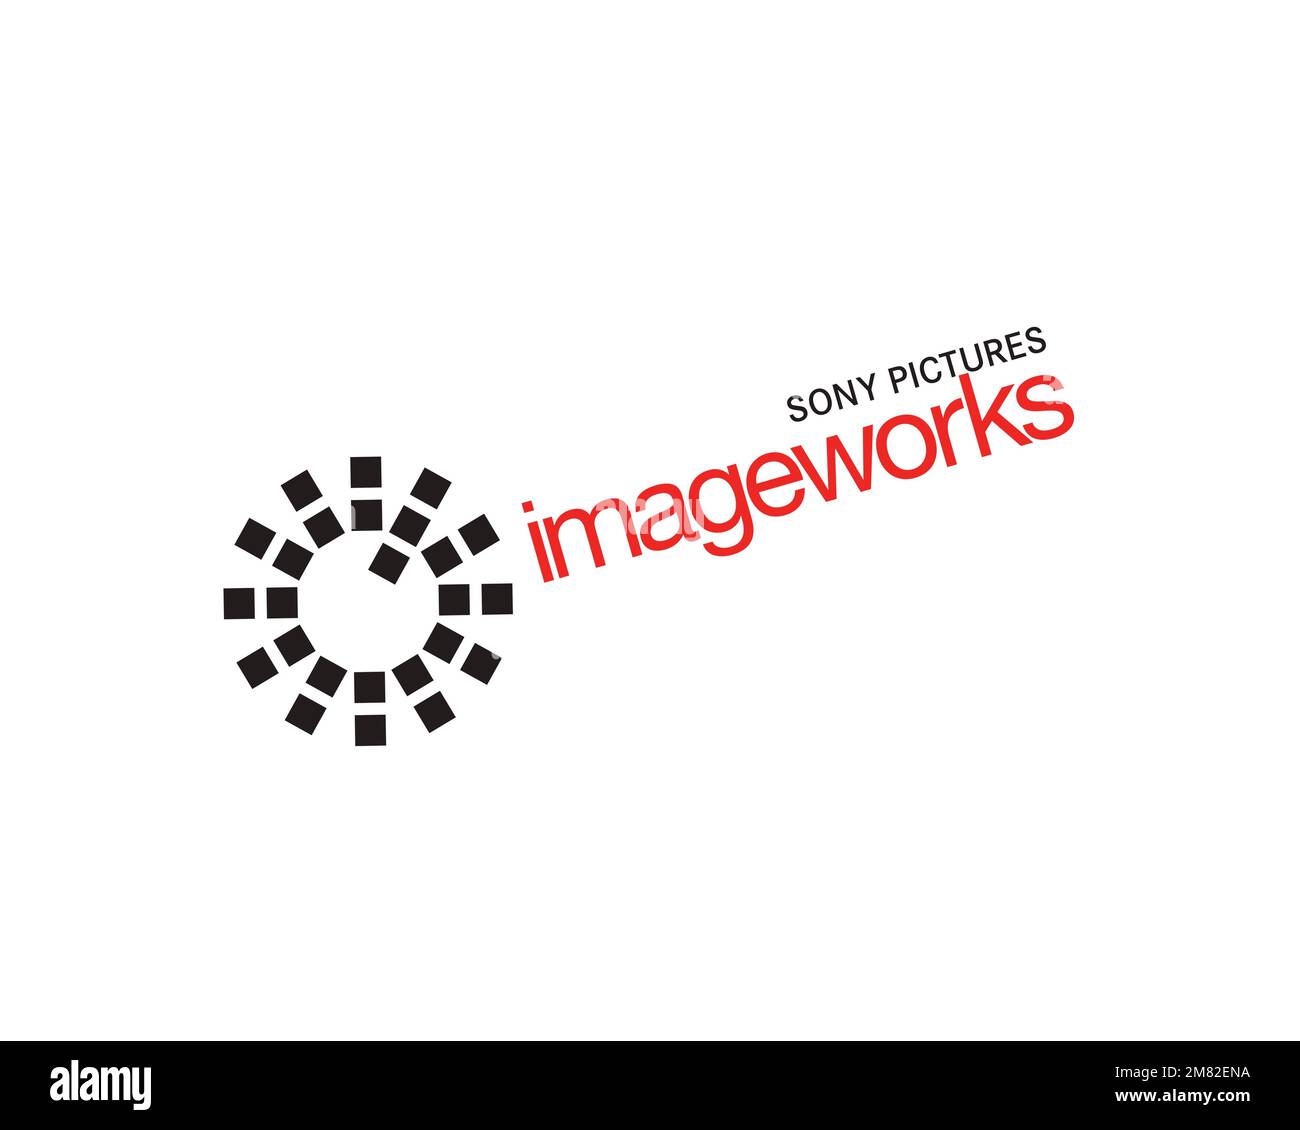 Sony Pictures Imageworks, rotated logo, white background Stock Photo